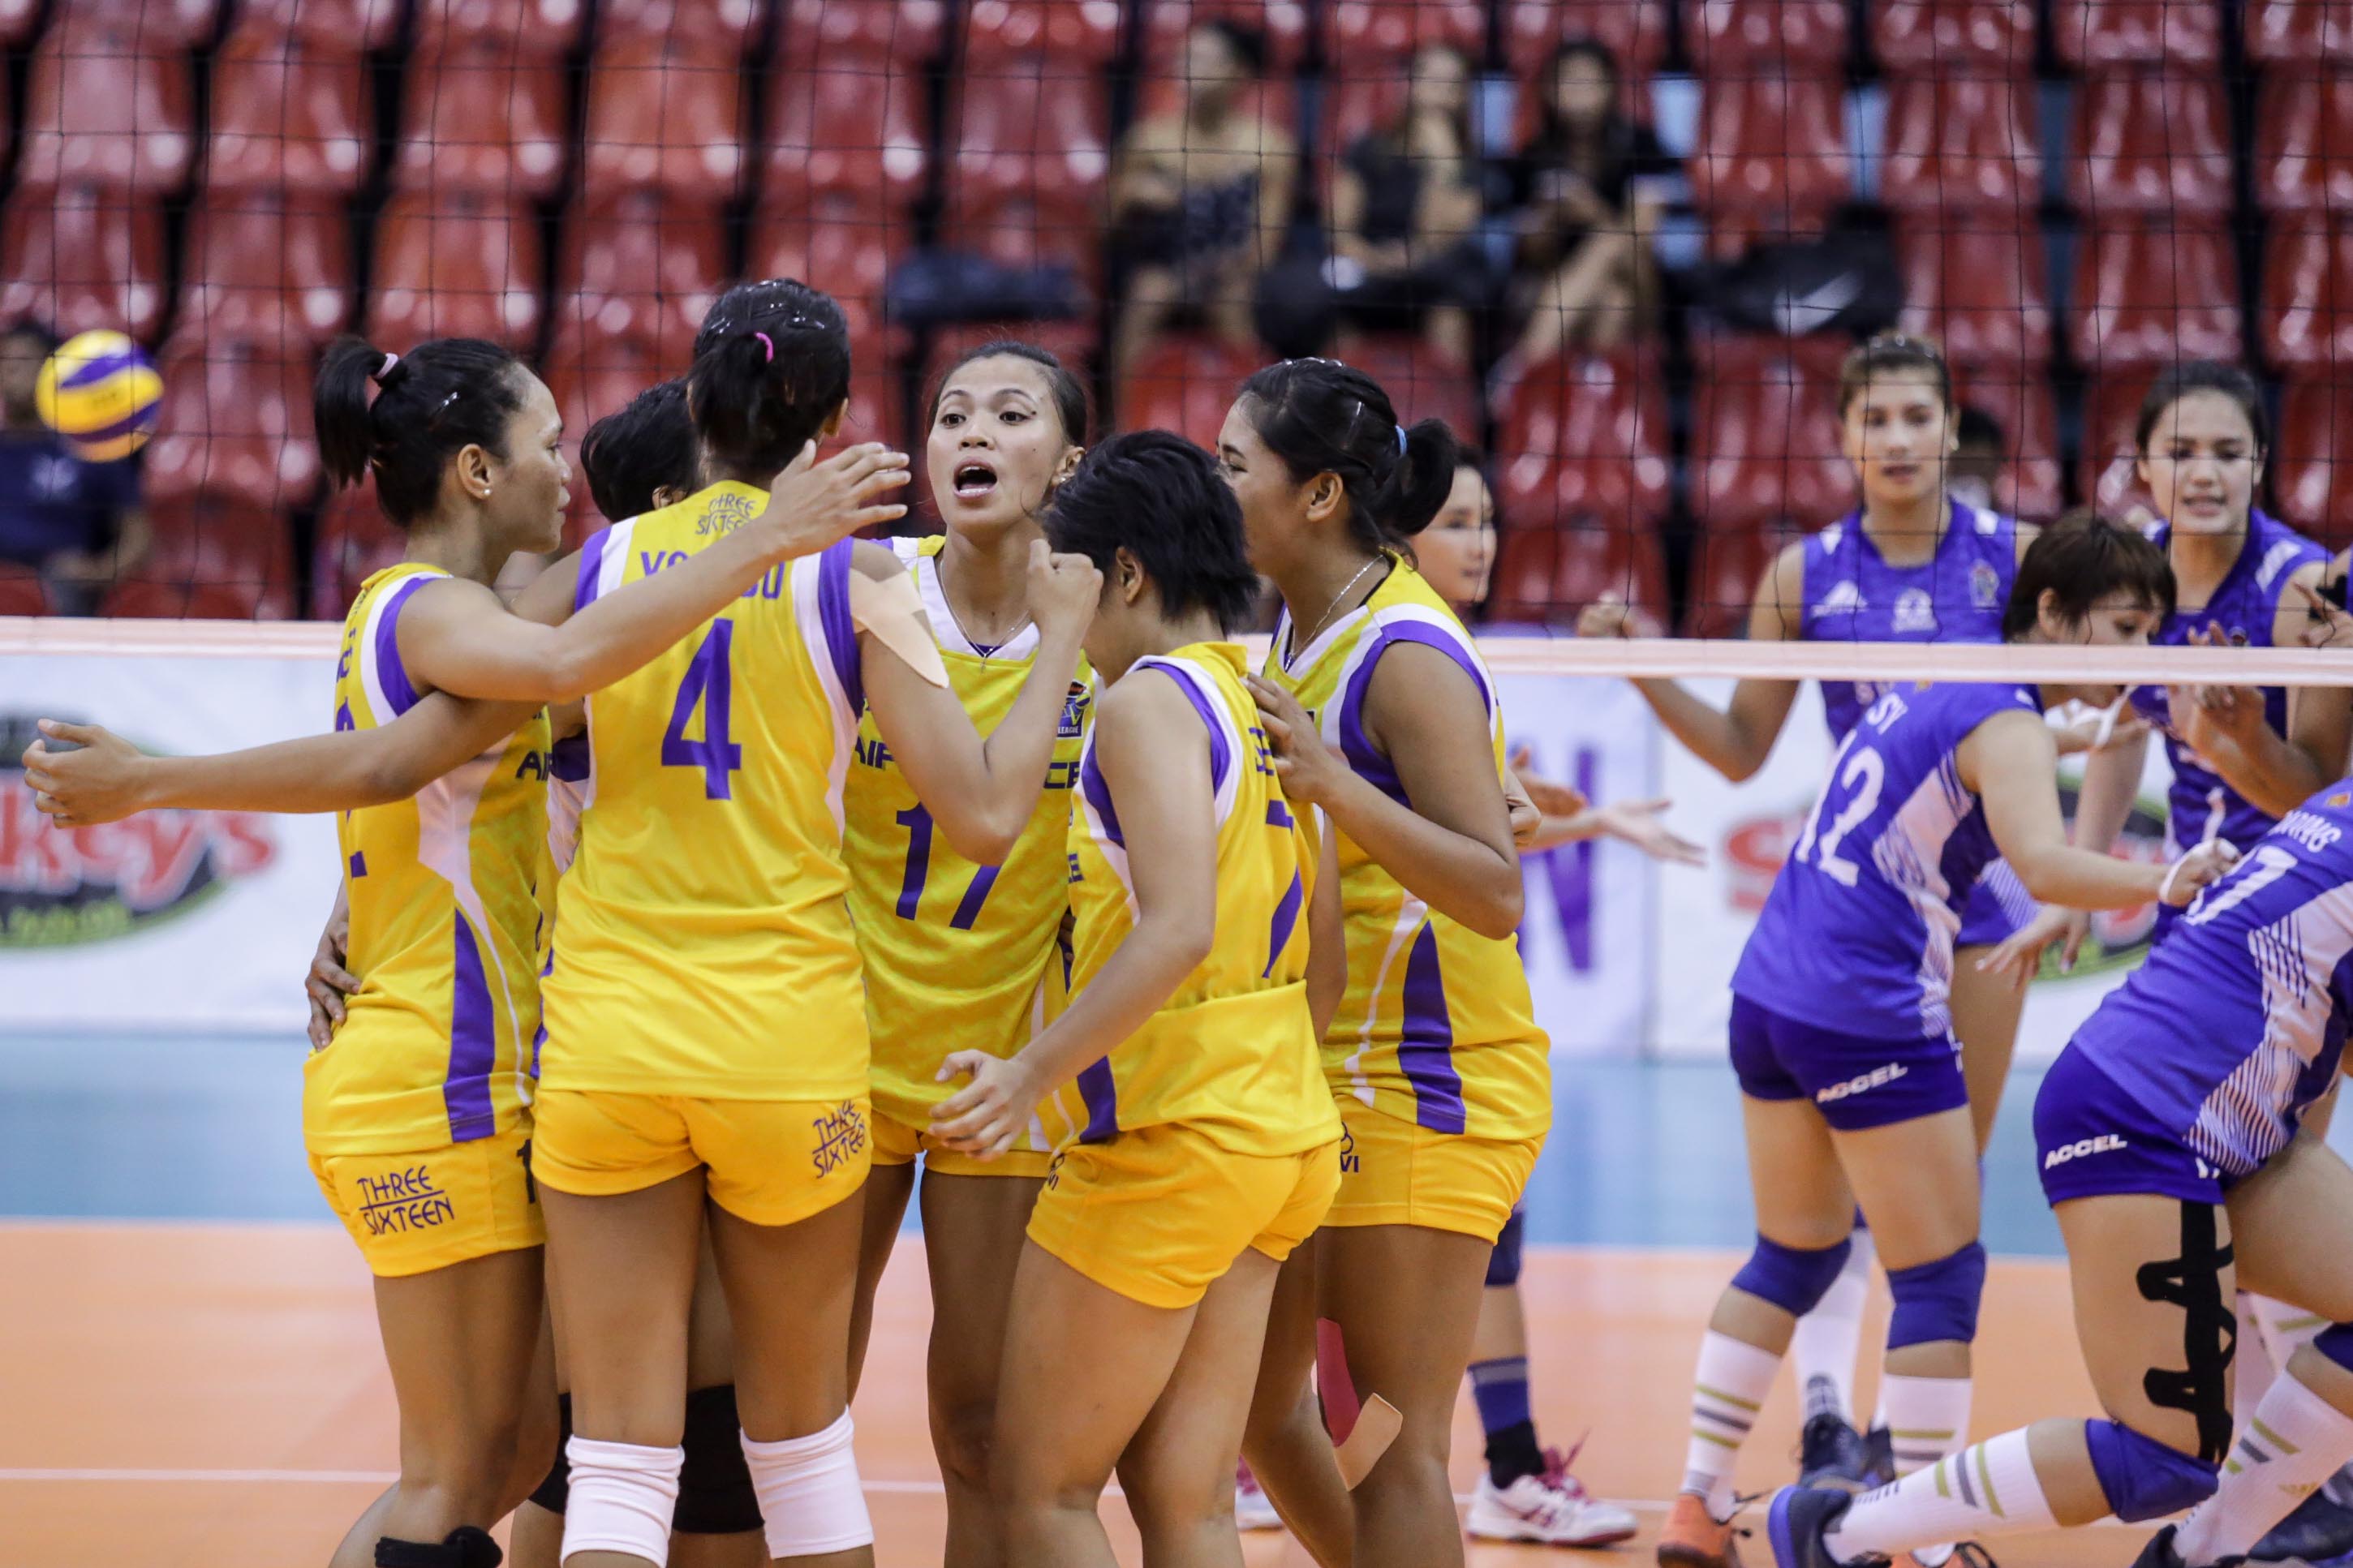 Philippine Air Force celebrates tough win over Pocari Sweat in game 1 of Shakey's V-League Finals. Photo by Tristan Tamayo/INQUIRER.net